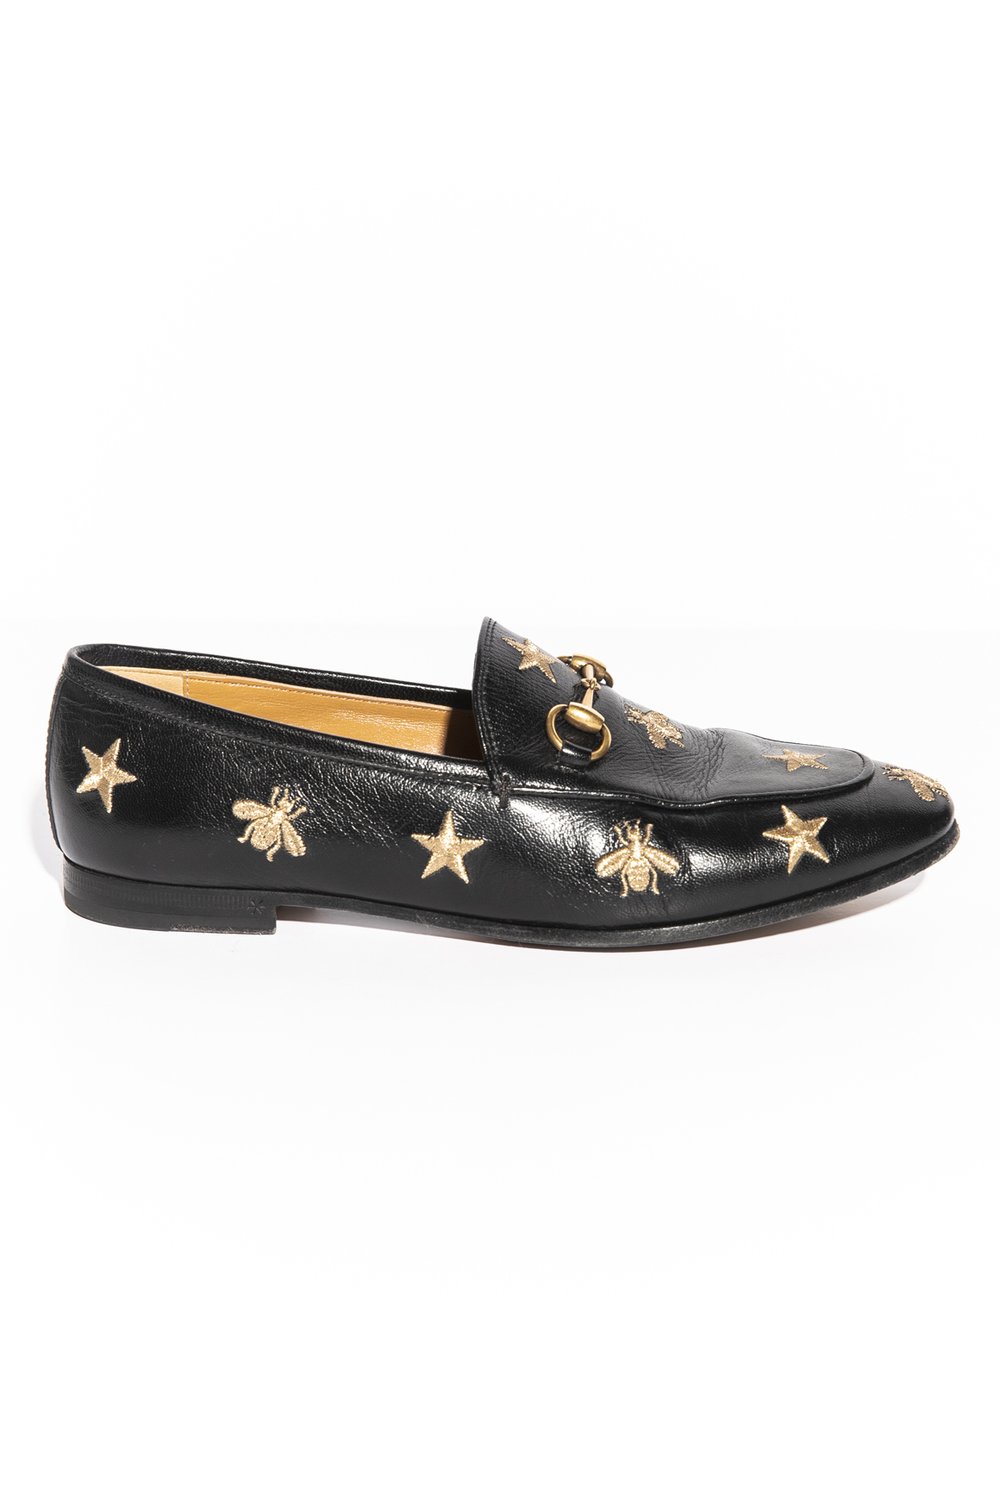 klint Koge Waterfront GUCCI Black & Gold Embroidered Loafers (Sz. 37) — MOSS Designer Consignment